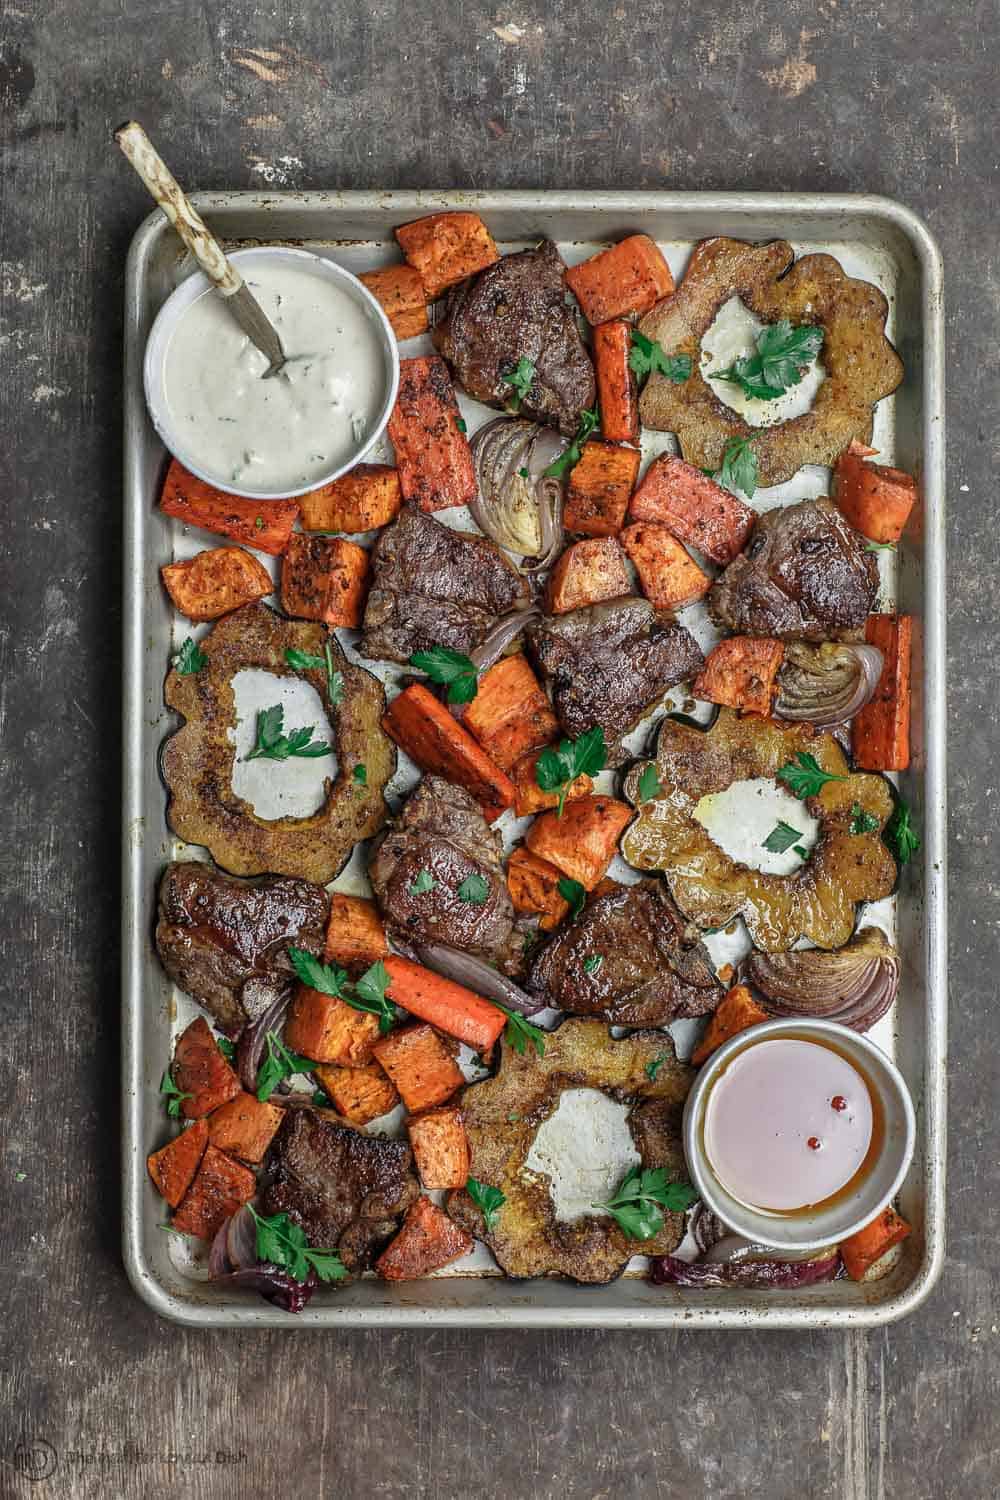 BAKED LAMB CHOPS WITH ROASTED ROOT VEGETABLES - Sykes House Farm